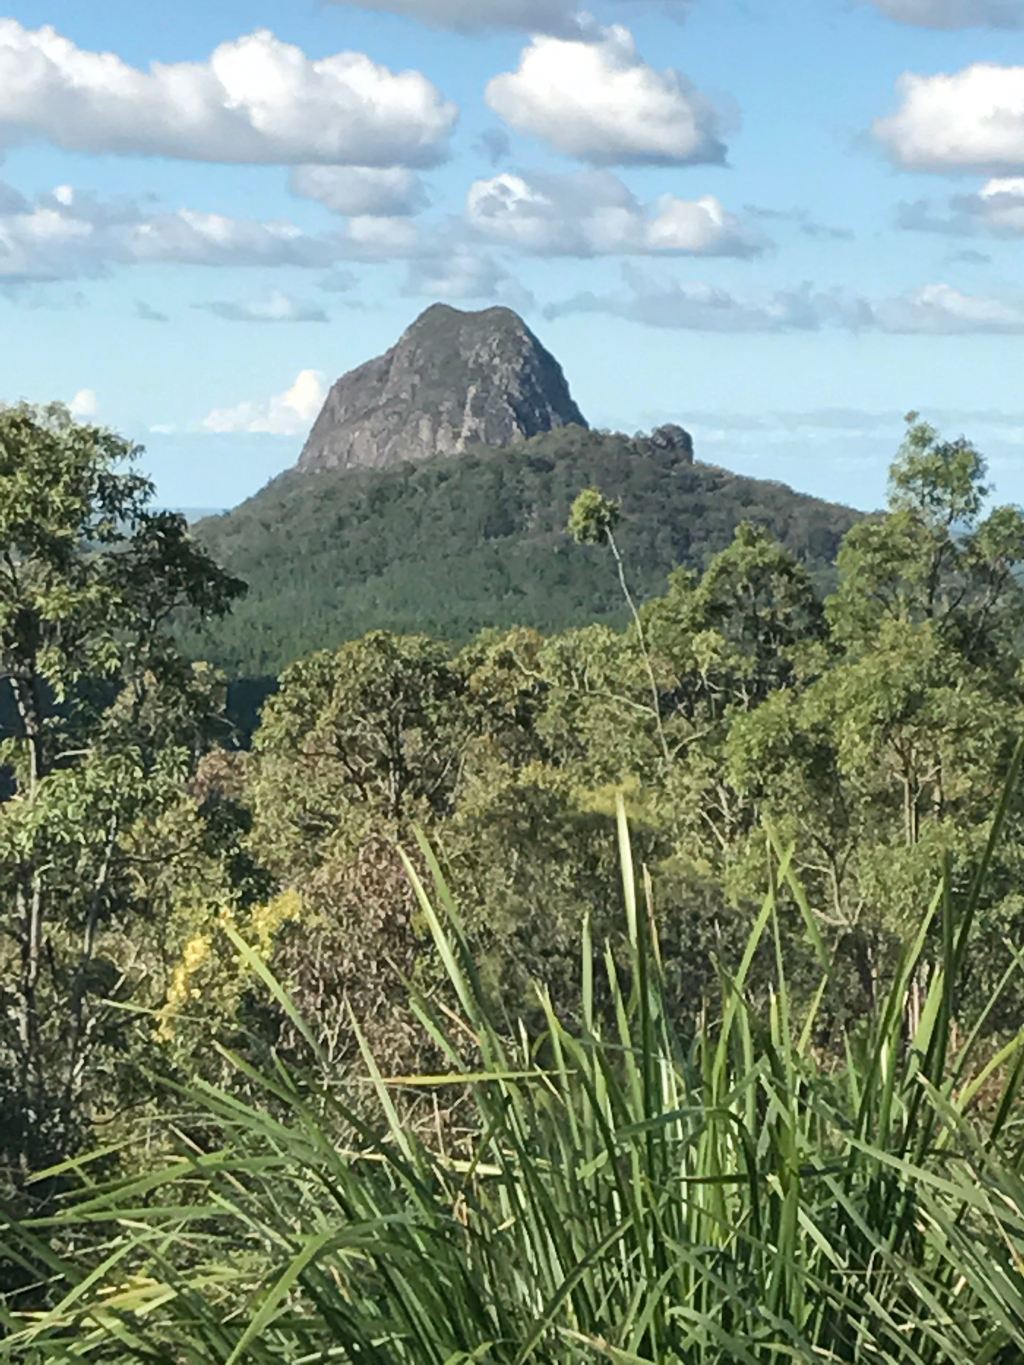 Glasshouse Mountains – the Lookout